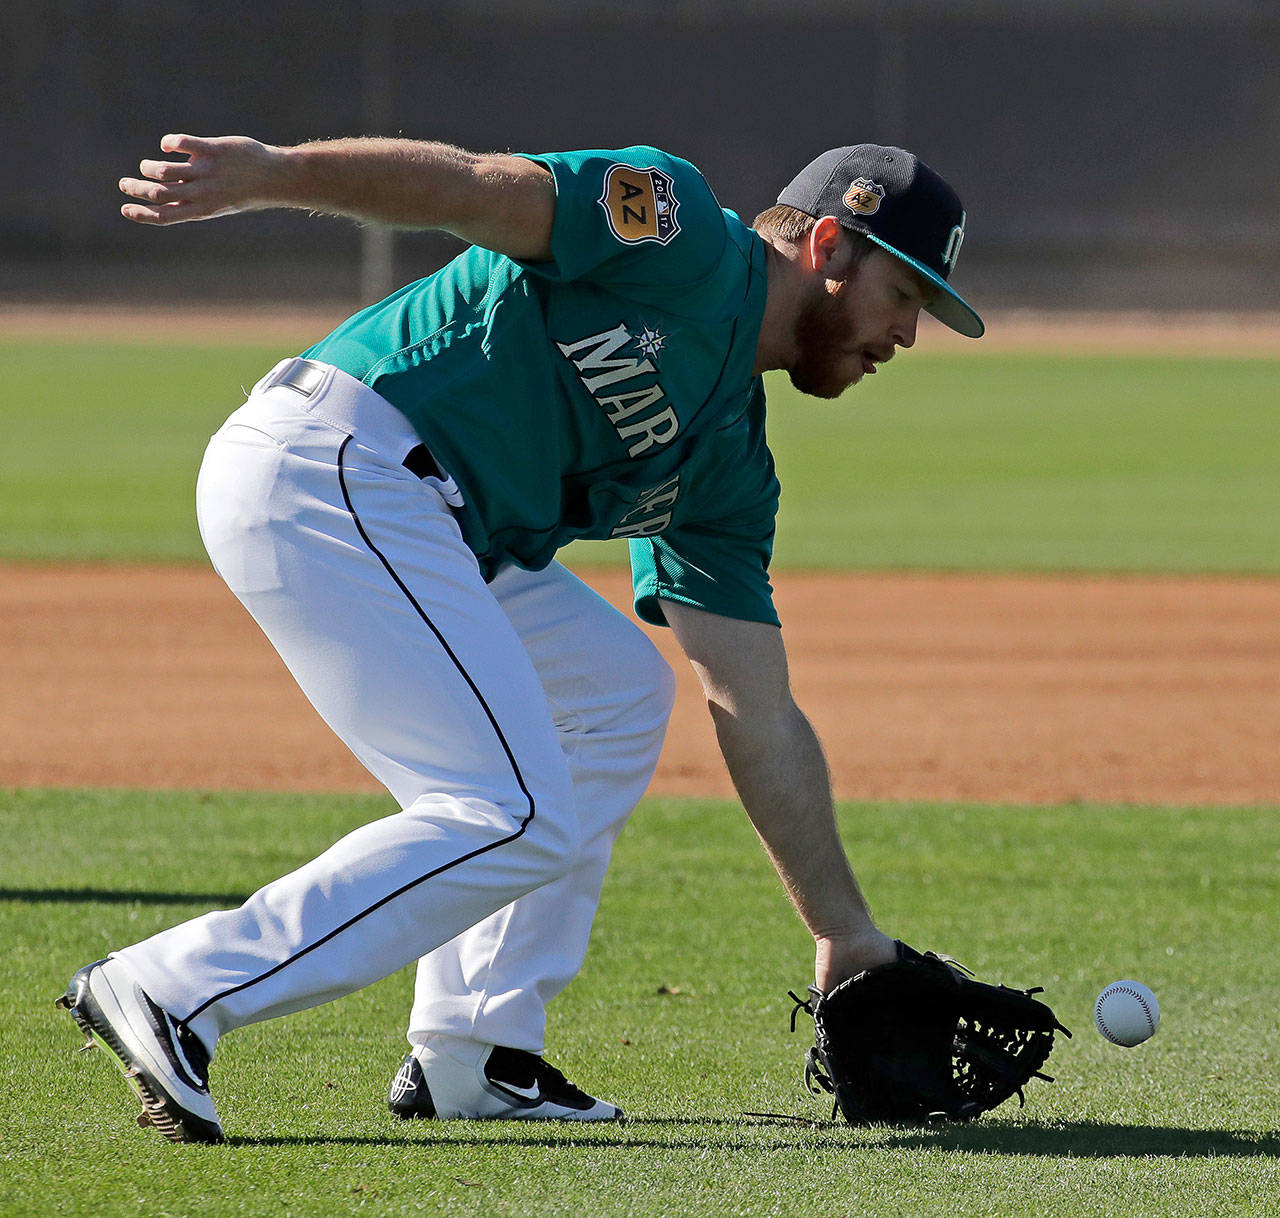 Mariners pitcher Shae Simmons is scaling back his throwing program to undergo further examination on the strained muscle in his forearm. (AP Photo/Charlie Riedel)